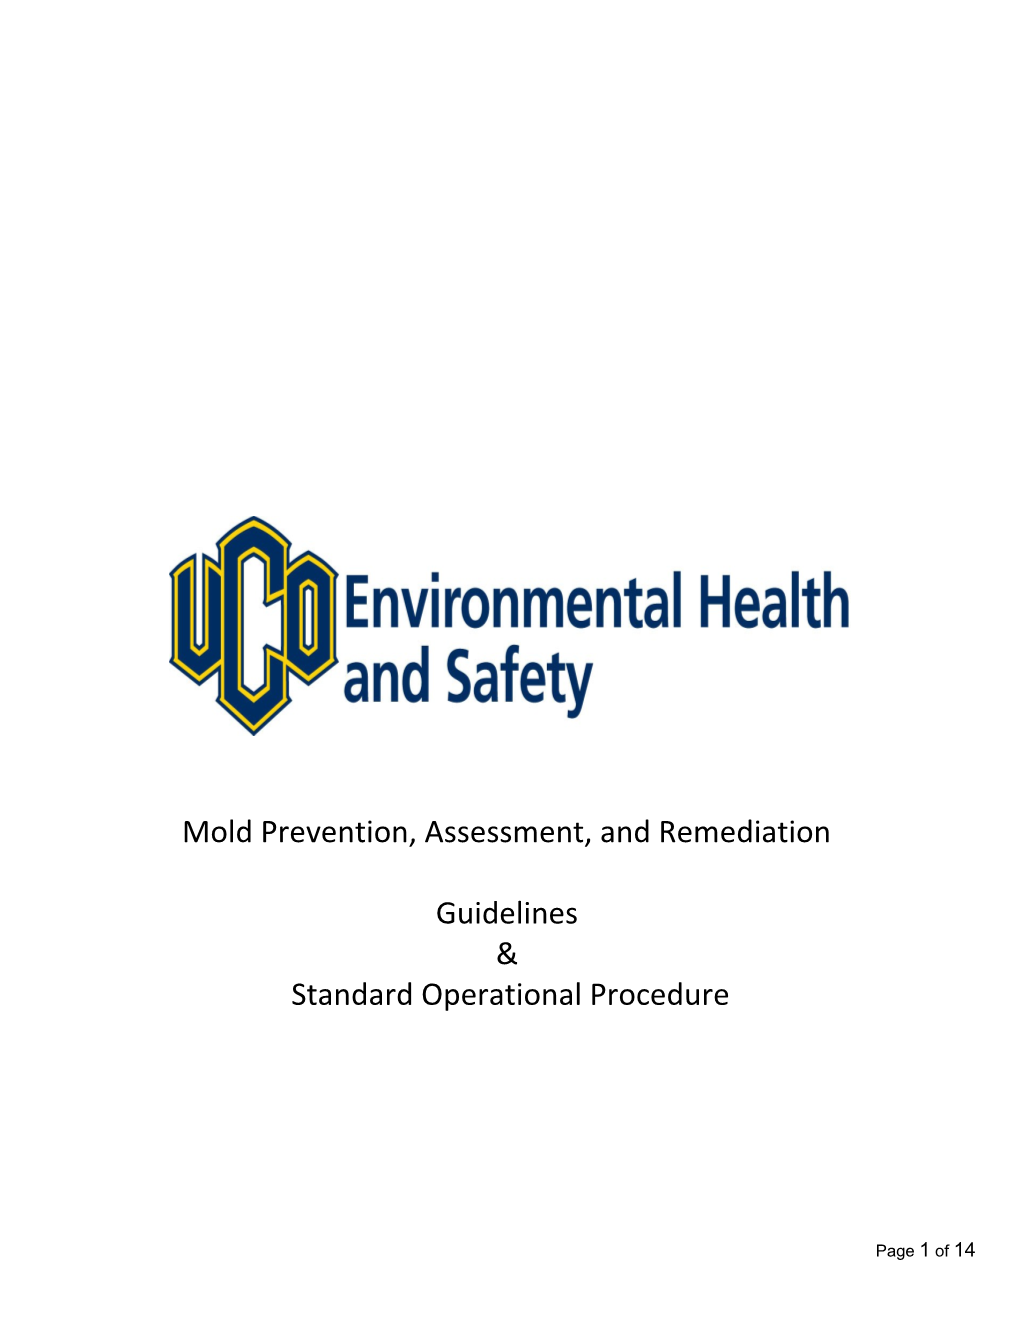 Mold Prevention, Assessment, and Remediation